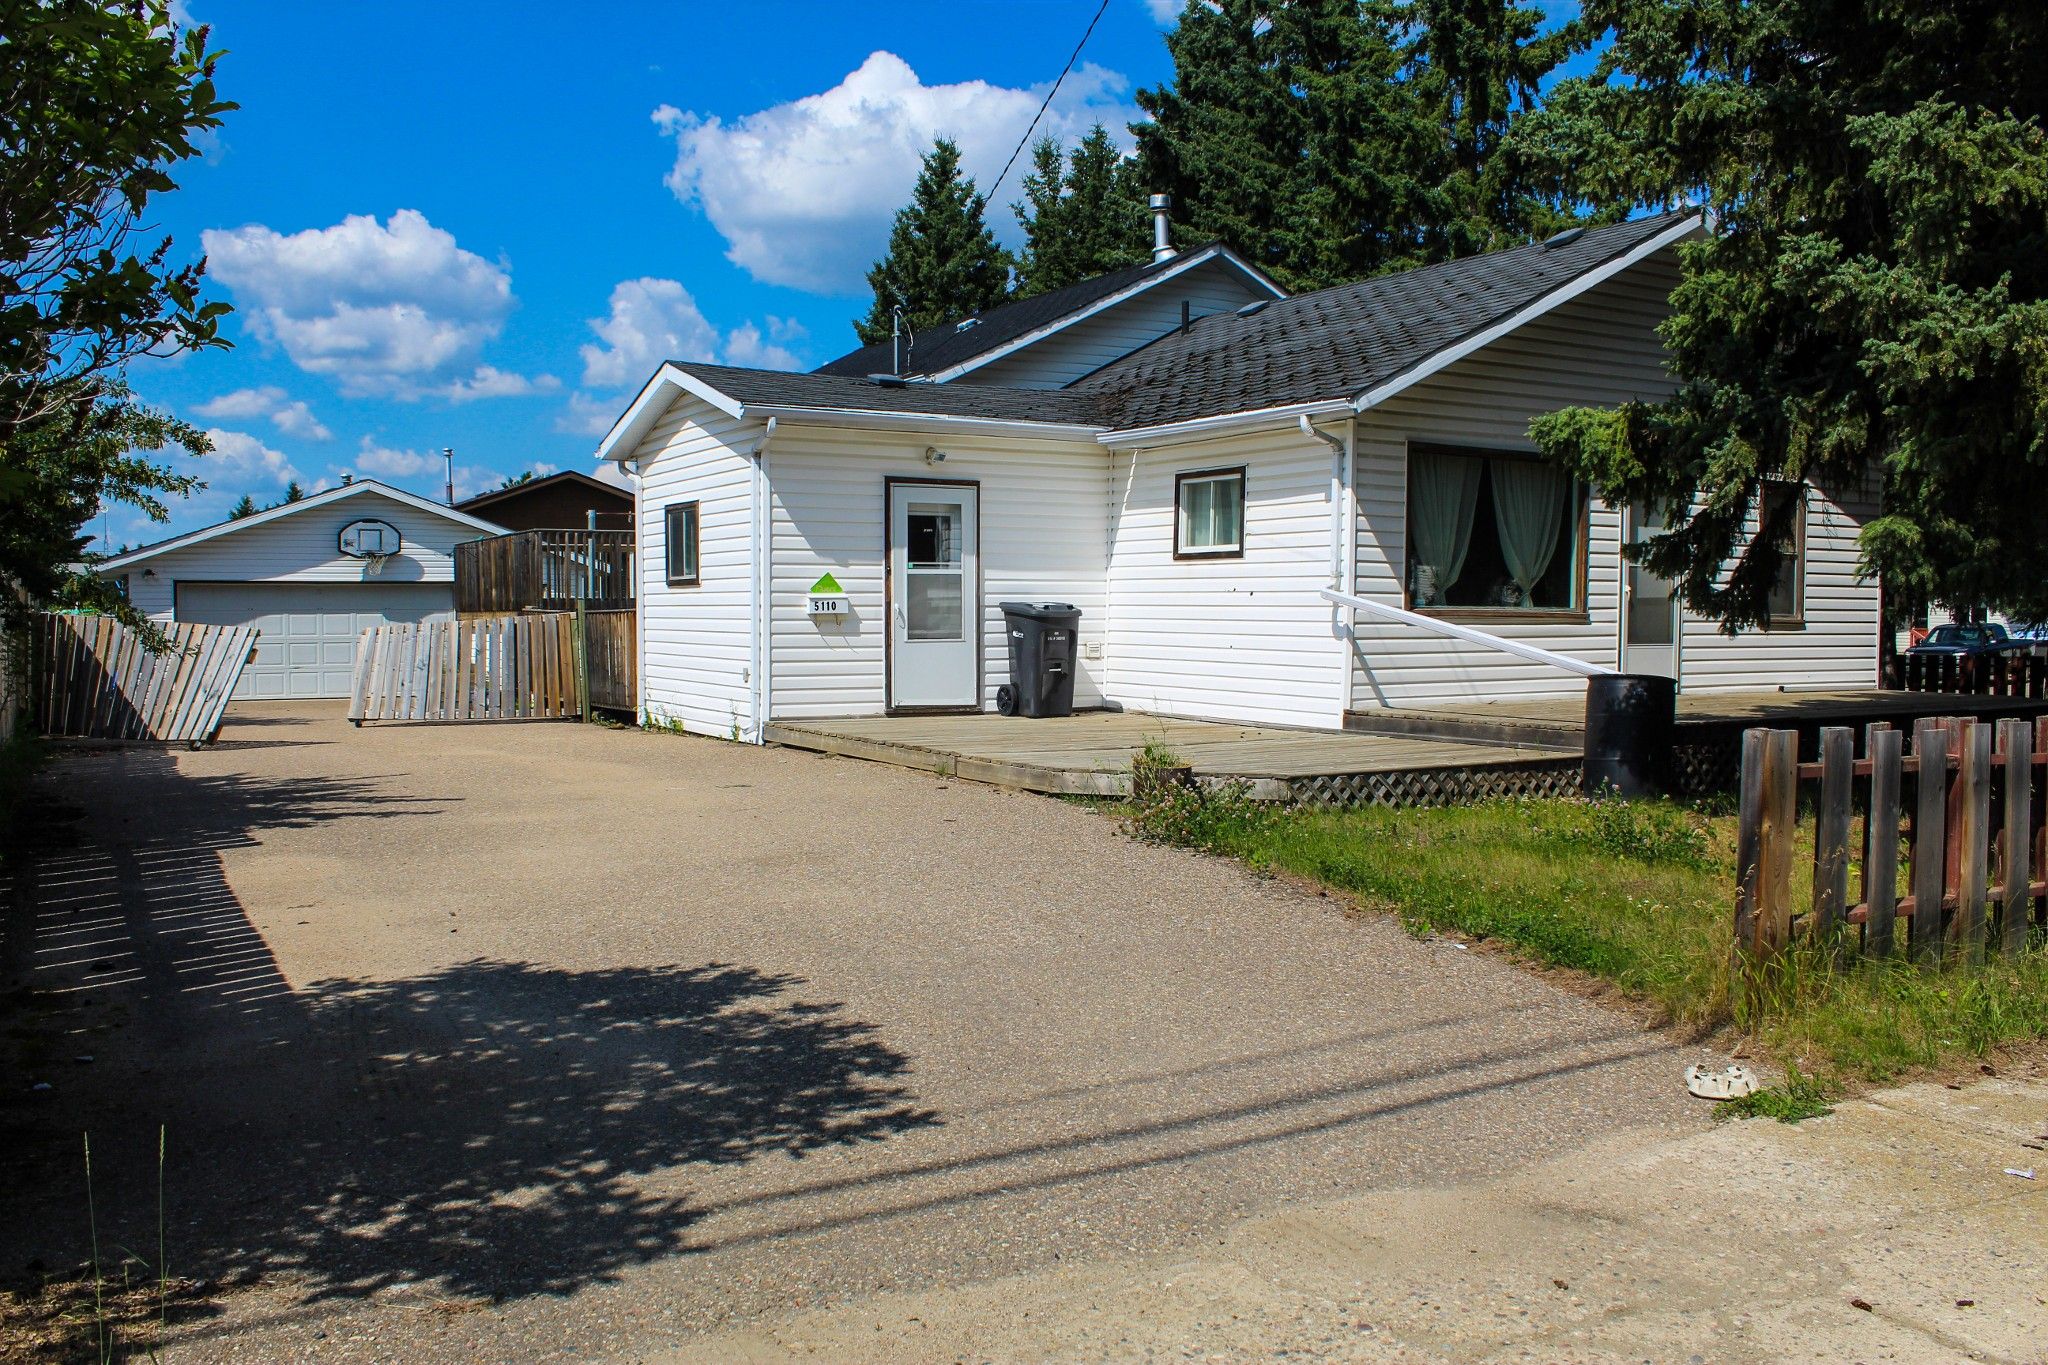 Main Photo: 5110 58 Street in Cold Lake: House for sale : MLS®# E4211095